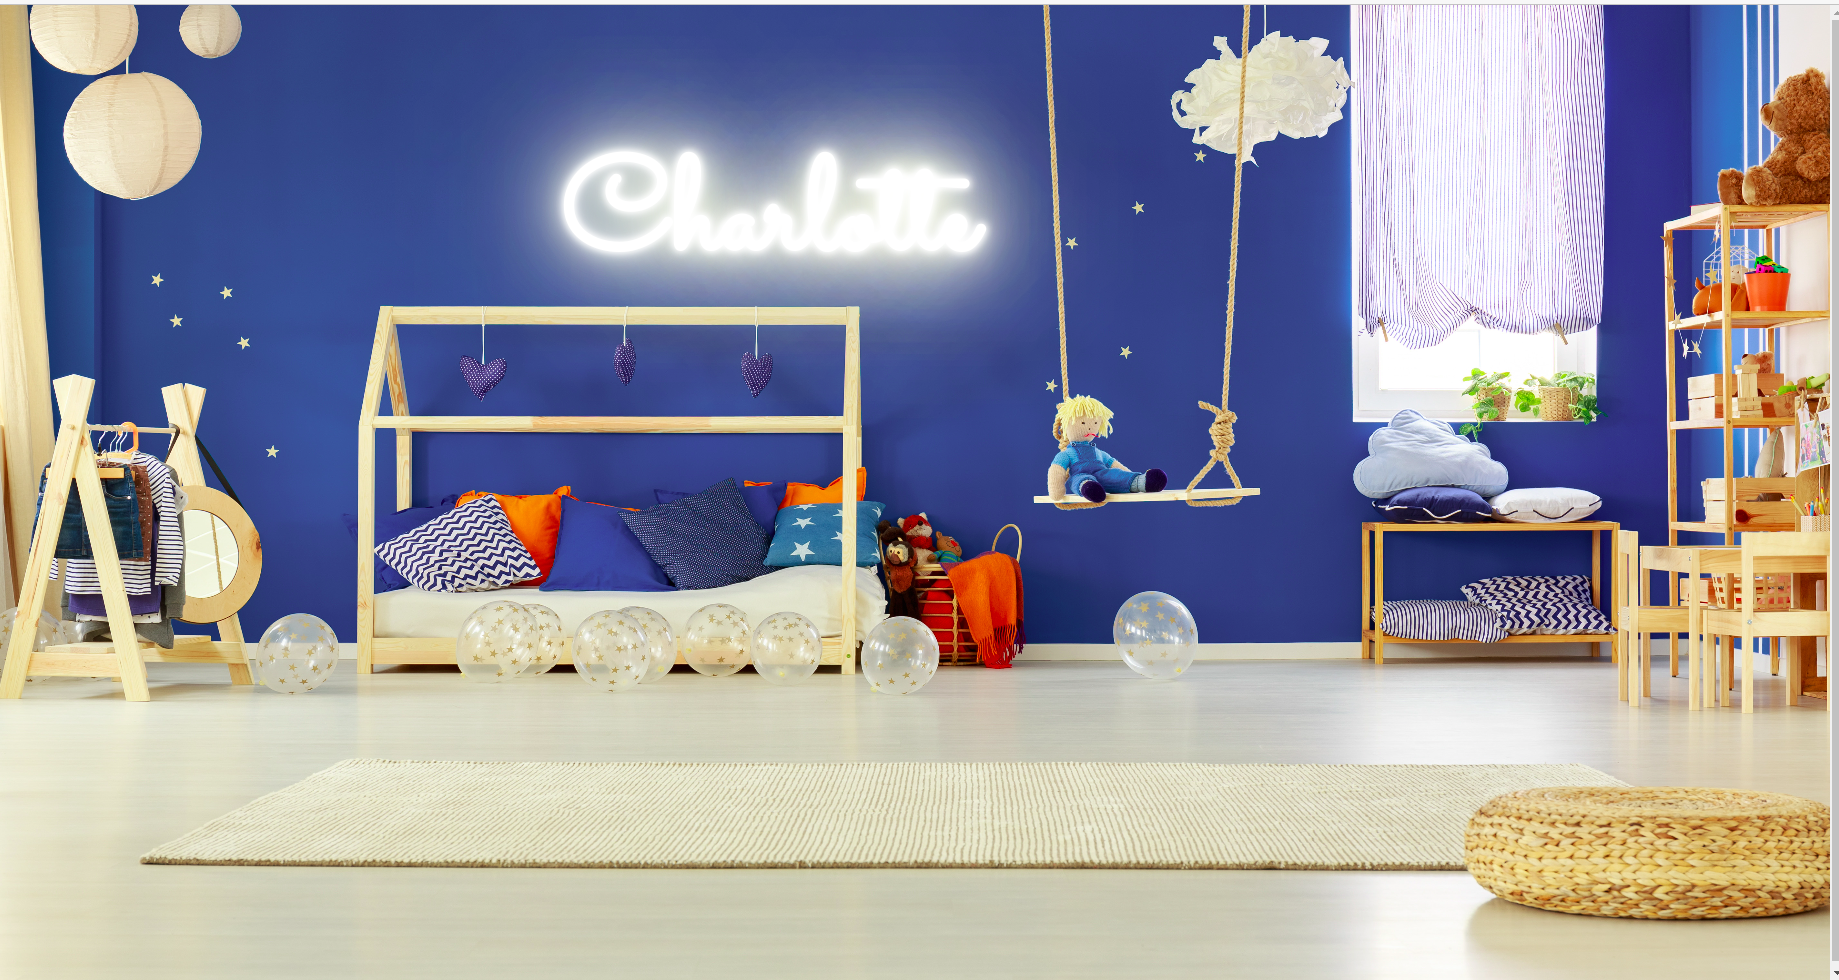 "Charlotte" Baby Name LED Neon Sign